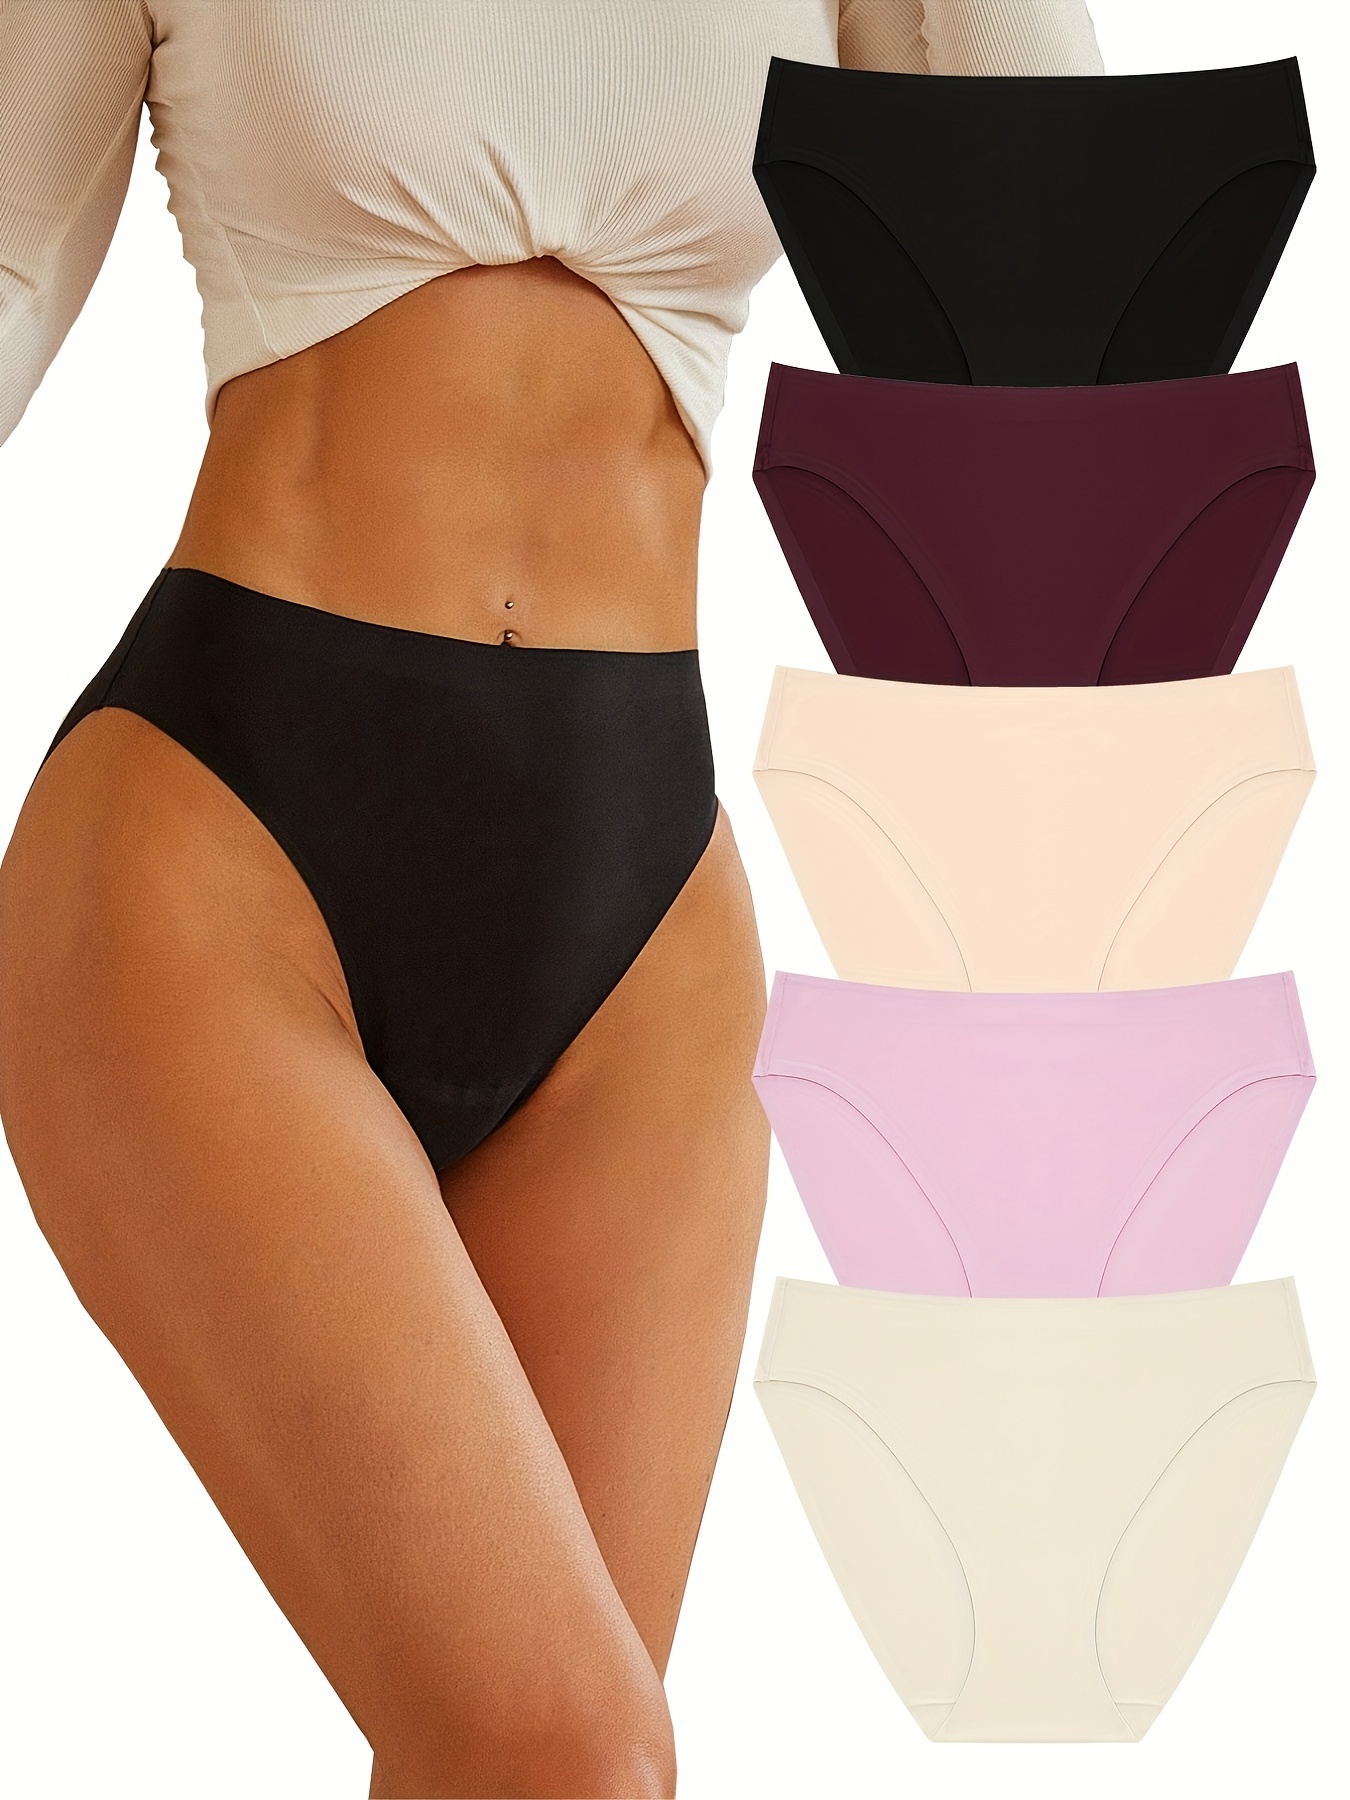 7pcs Seamless Solid Briefs, Comfy & Breathable Stretchy Intimates Panties,  Women's Lingerie & Underwear